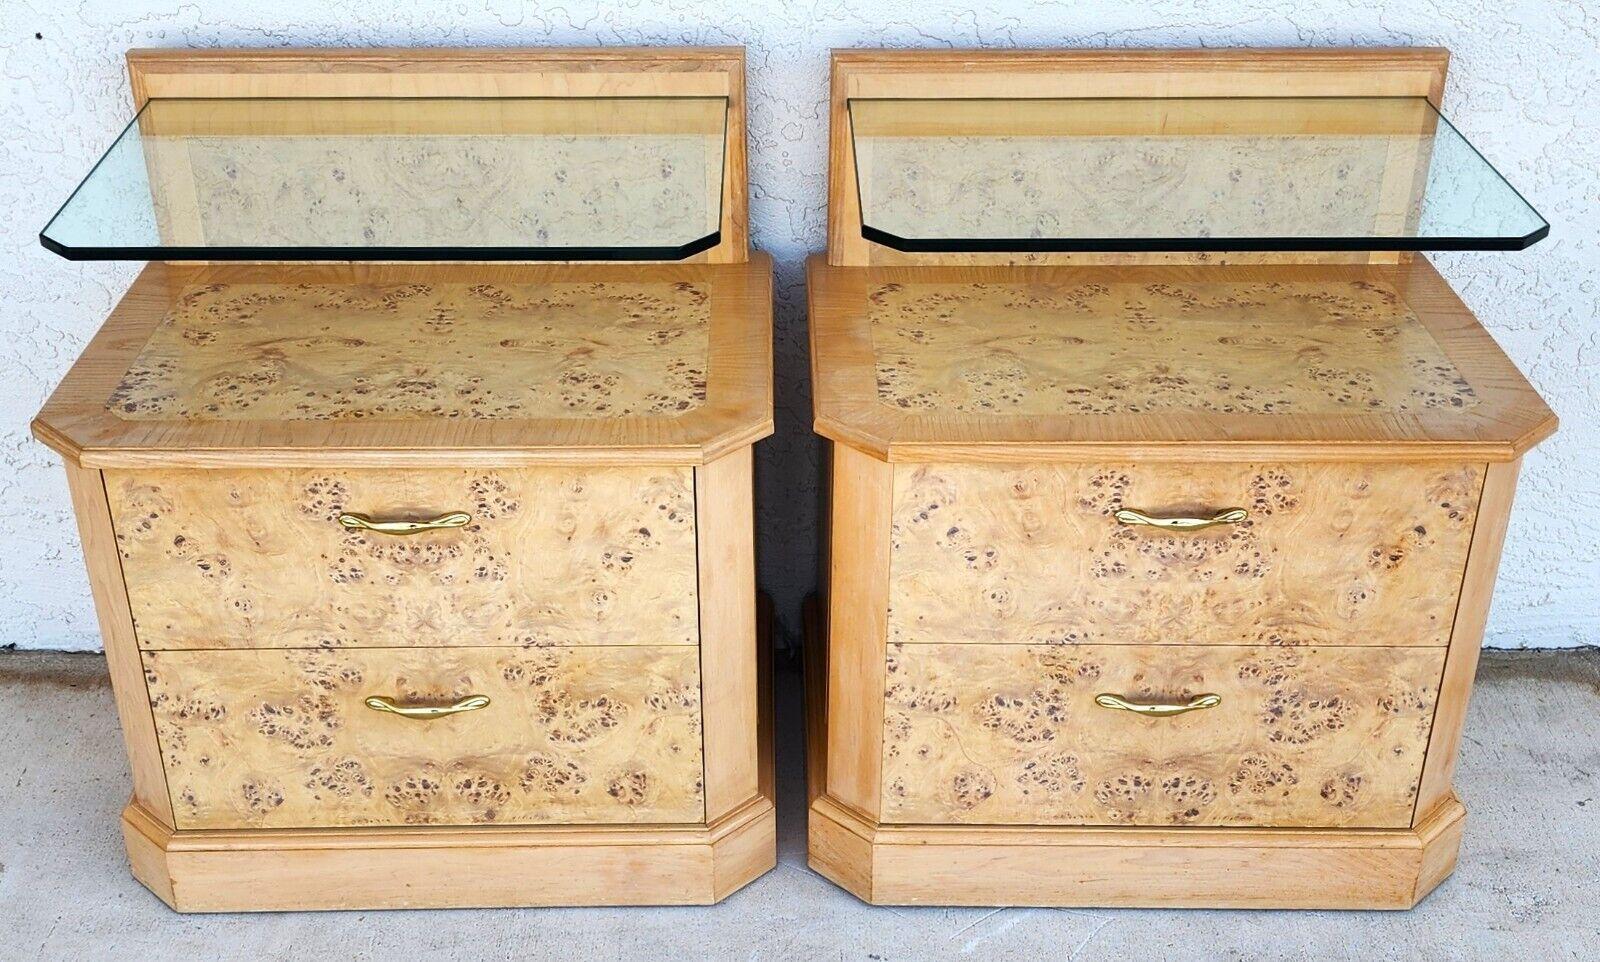 For FULL item description click on CONTINUE READING at the bottom of this page.

Offering One Of Our Recent Palm Beach Estate Fine Furniture Acquisitions Of A
Pair of Nightstands in the Drexel Heritage Corinthian Style
These are very well-made and